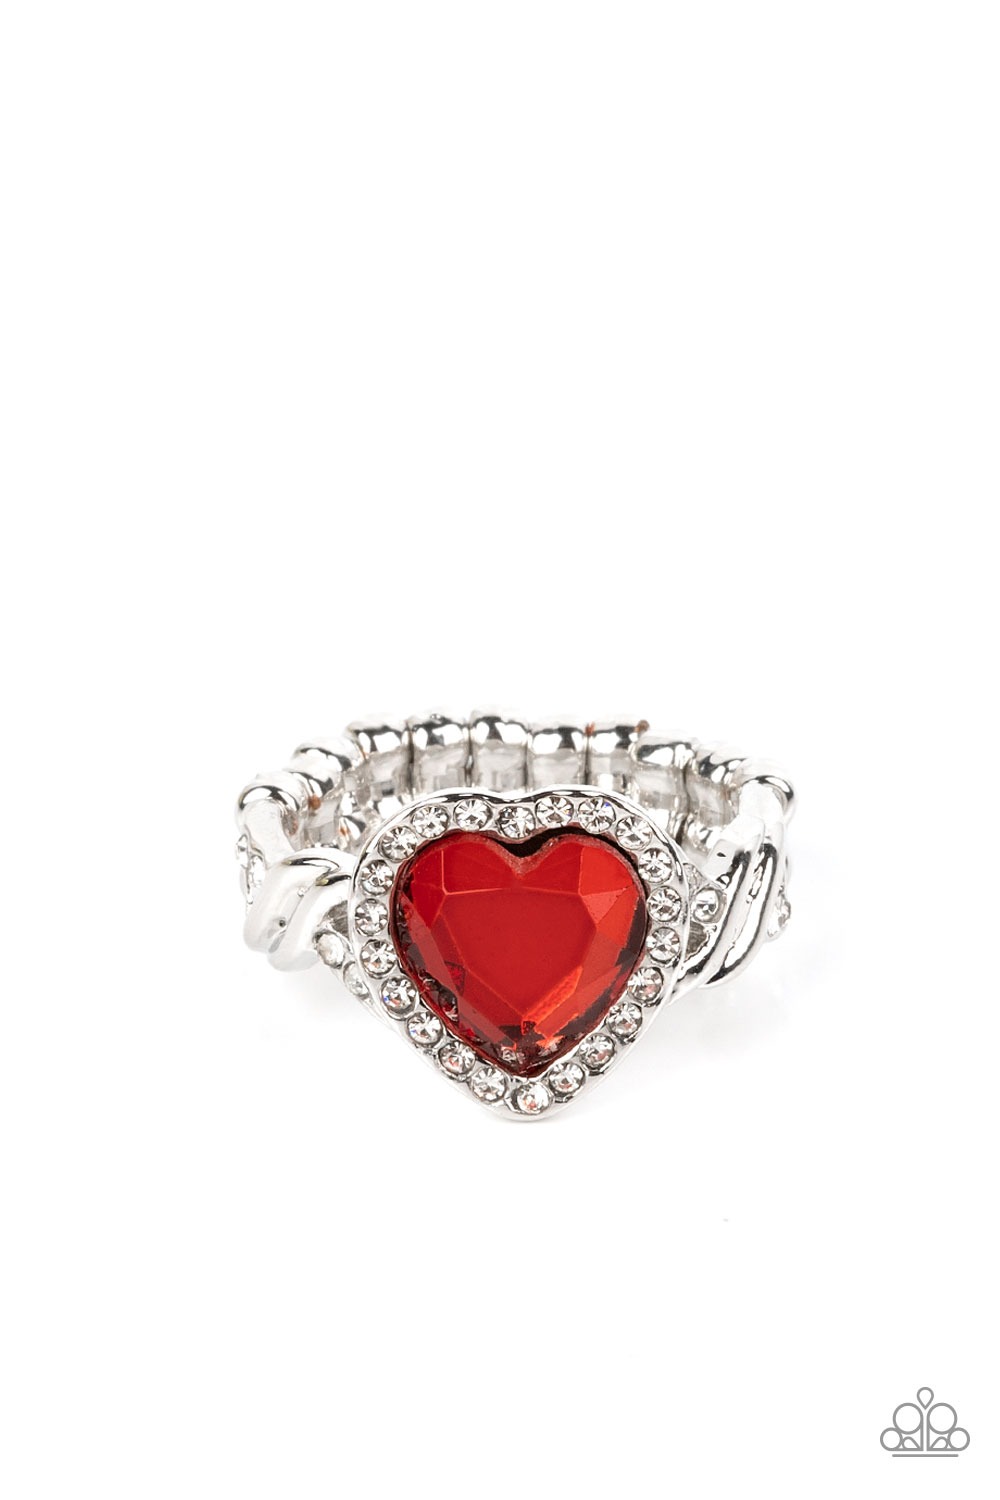 Ring - Committed to Cupid - Red